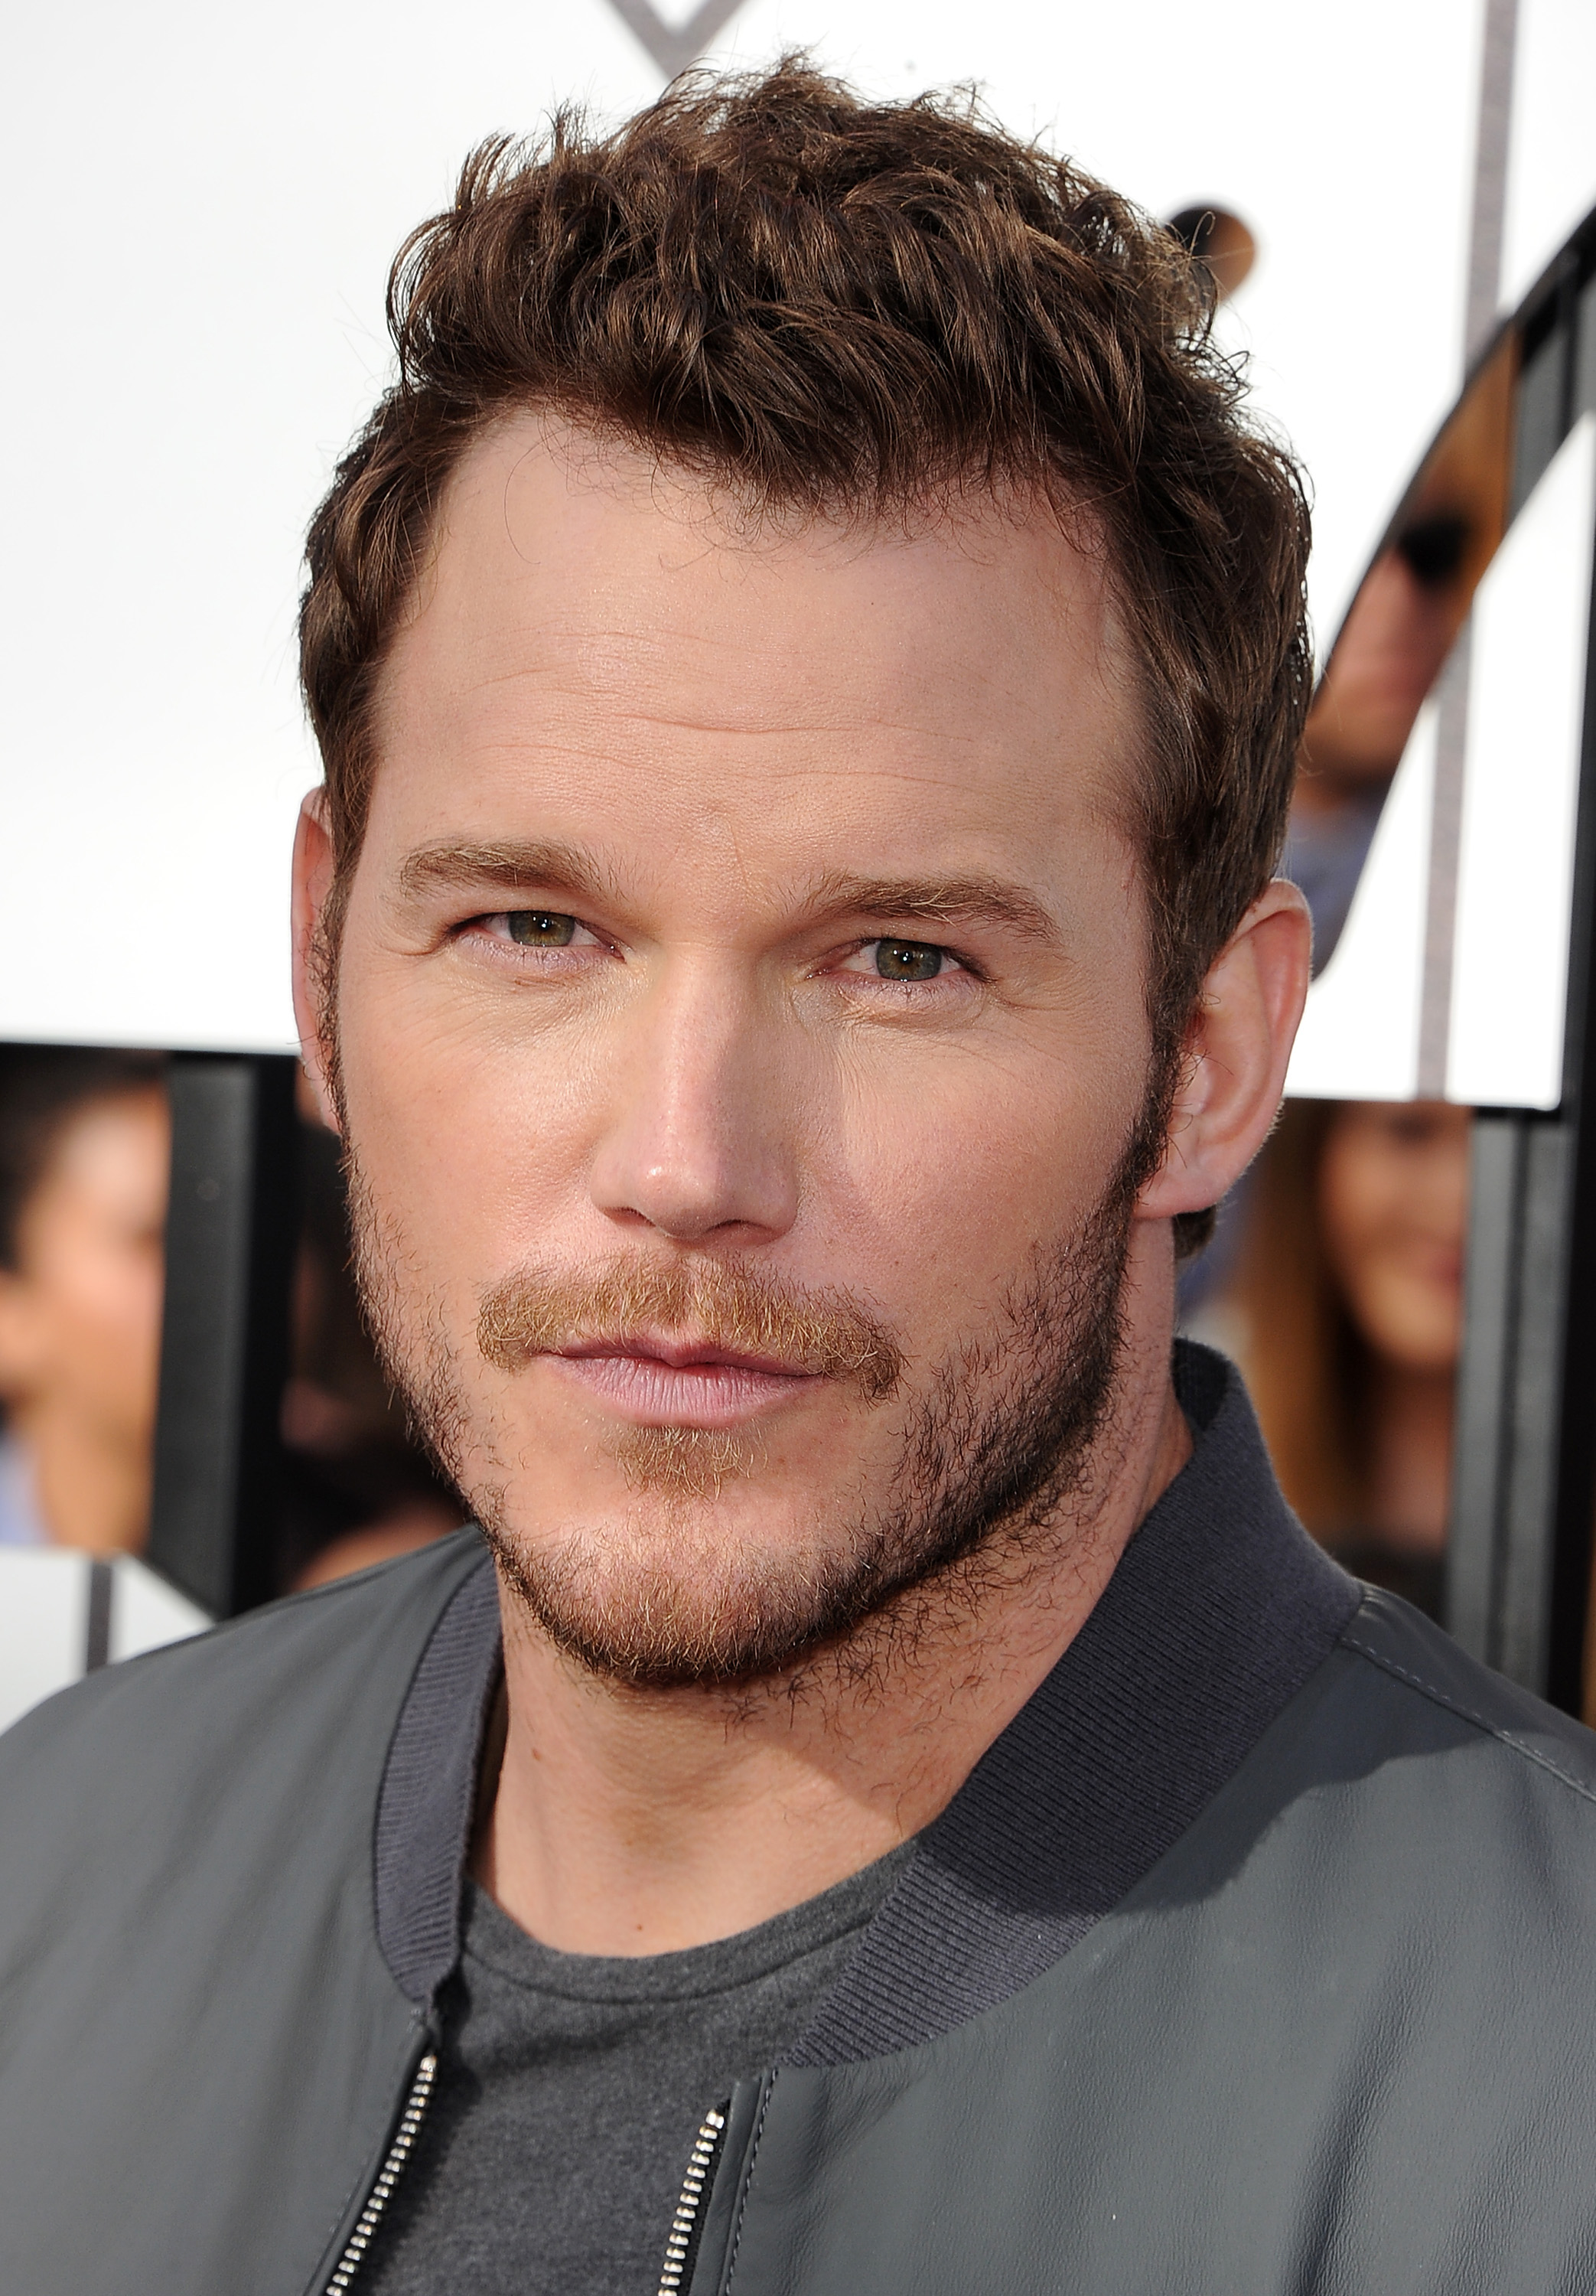 LOS ANGELES, CA - APRIL 13:  Actor Chris Pratt attends the 2014 MTV Movie Awards at Nokia Theatre L.A. Live on April 13, 2014 in Los Angeles, California.  (Photo by Steve Granitz/WireImage) (Steve Granitz&mdash;WireImage)